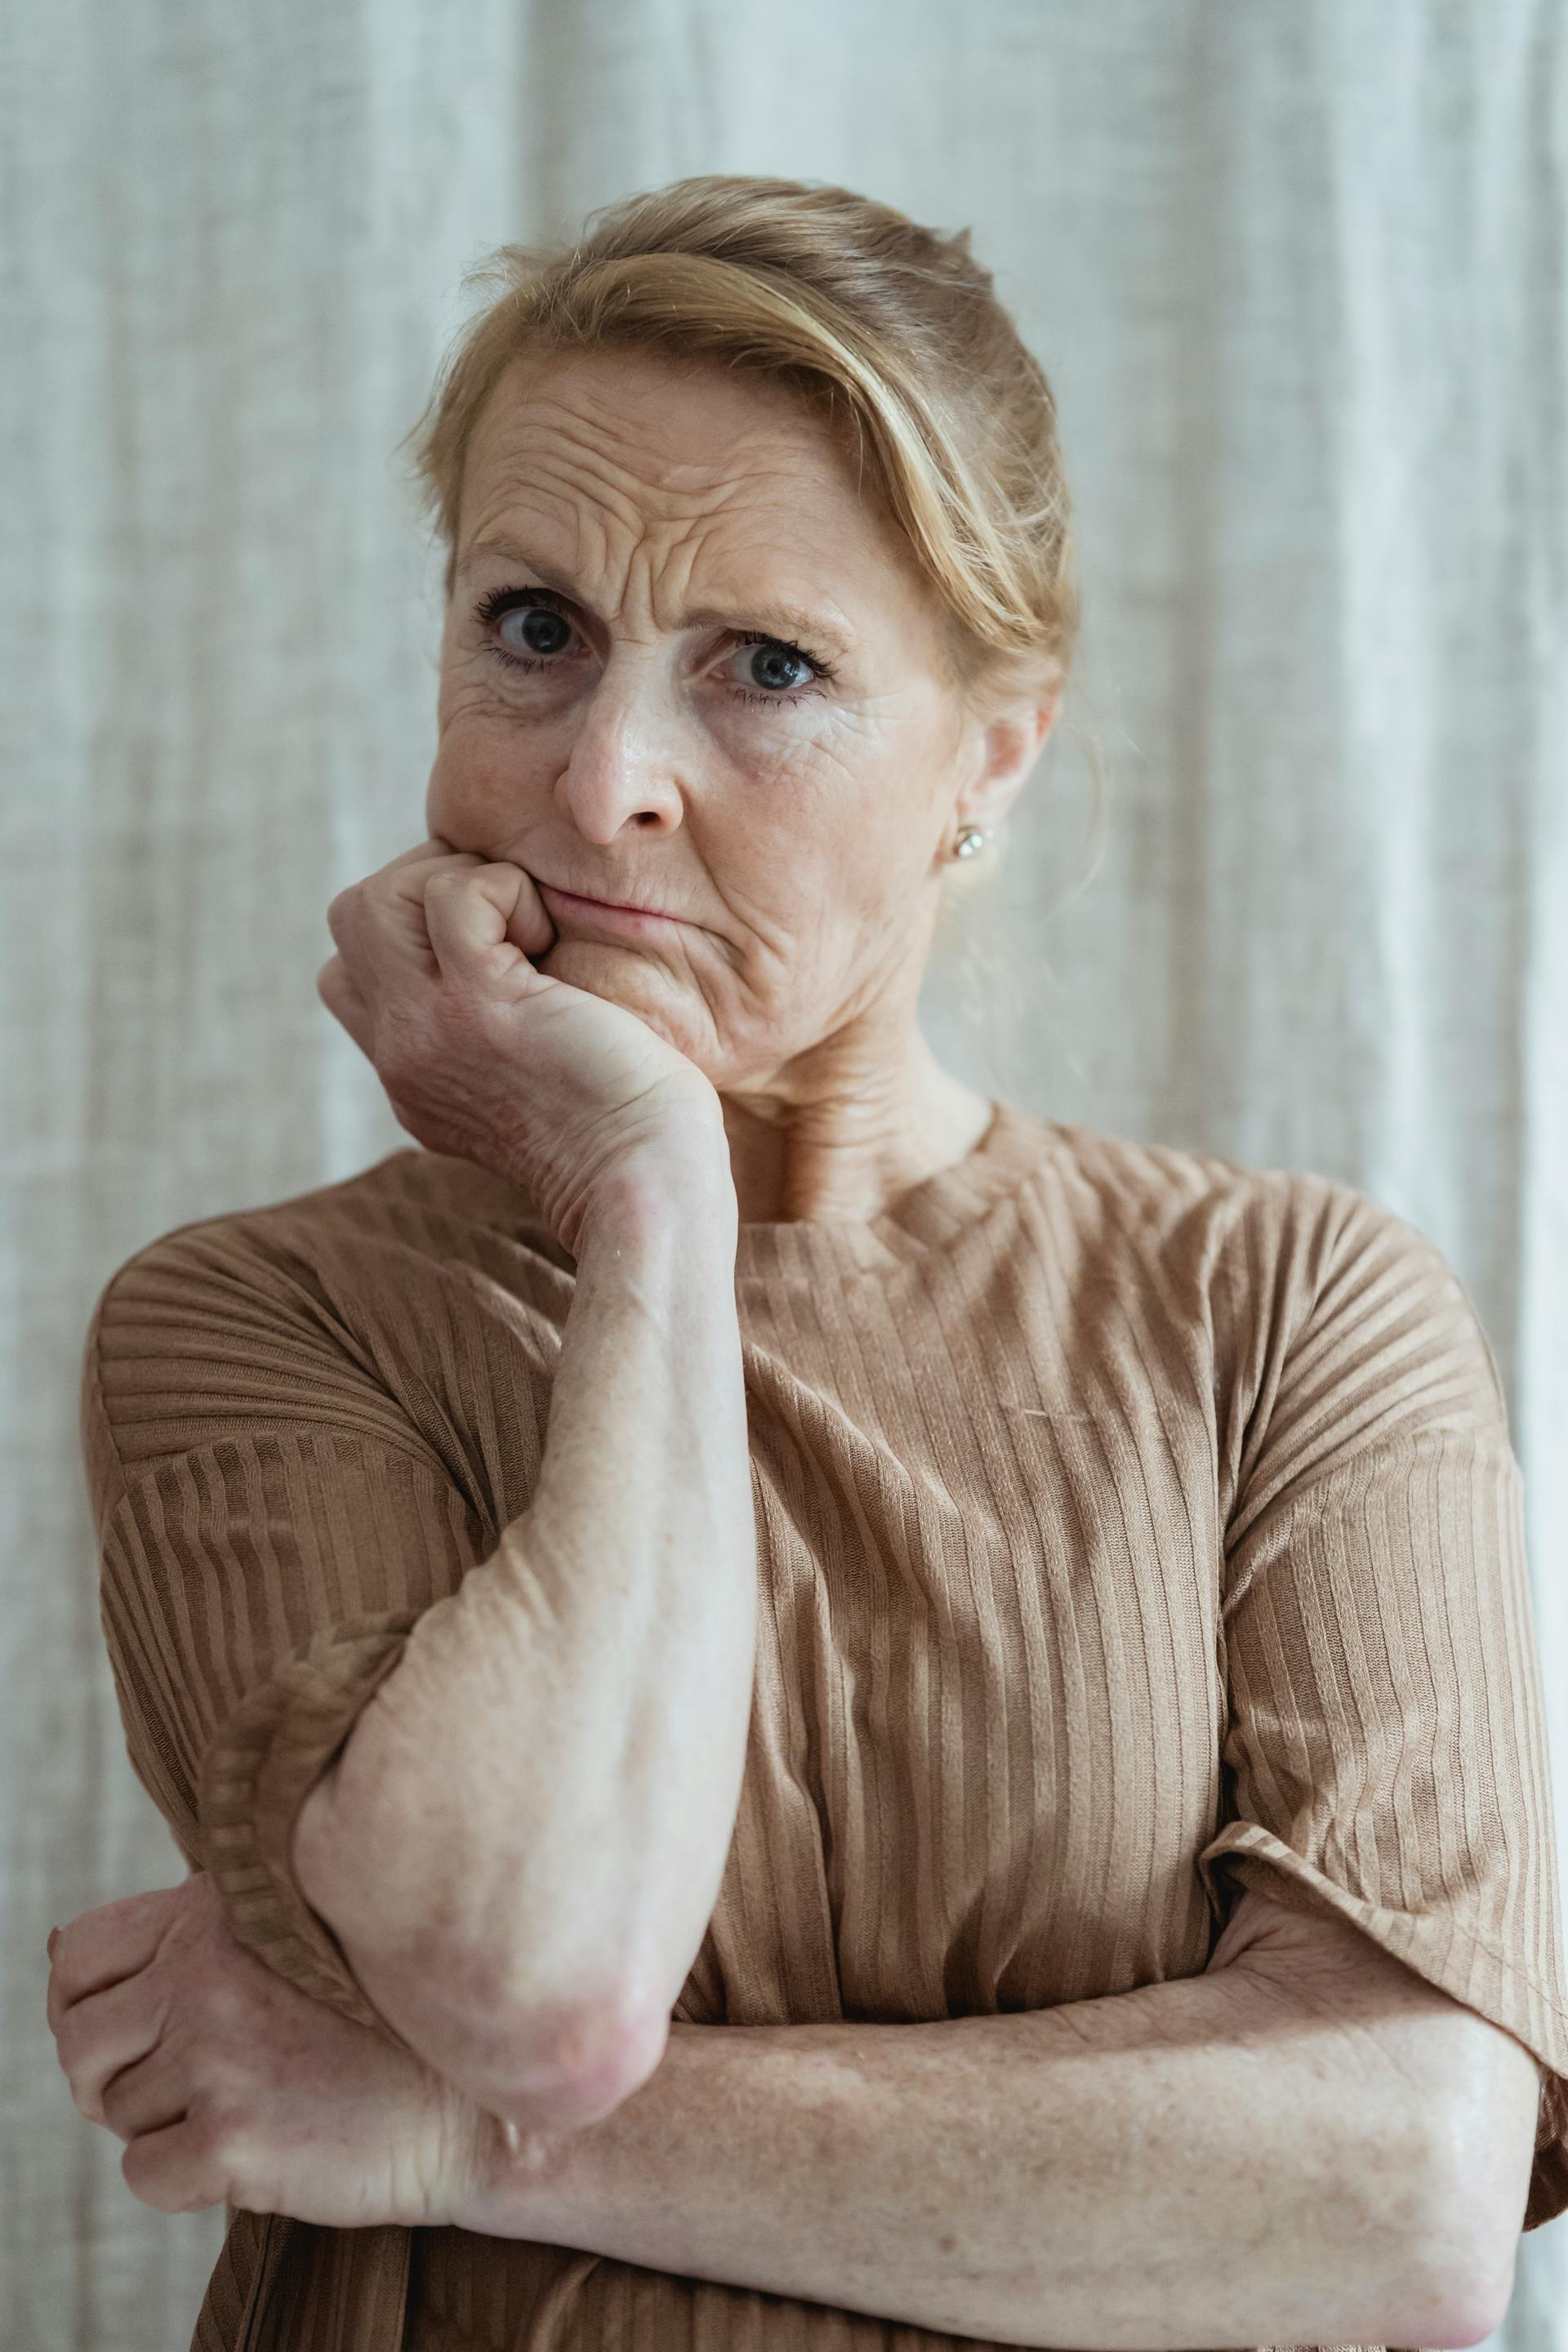 Older woman with a worried expression | Source: Pexels